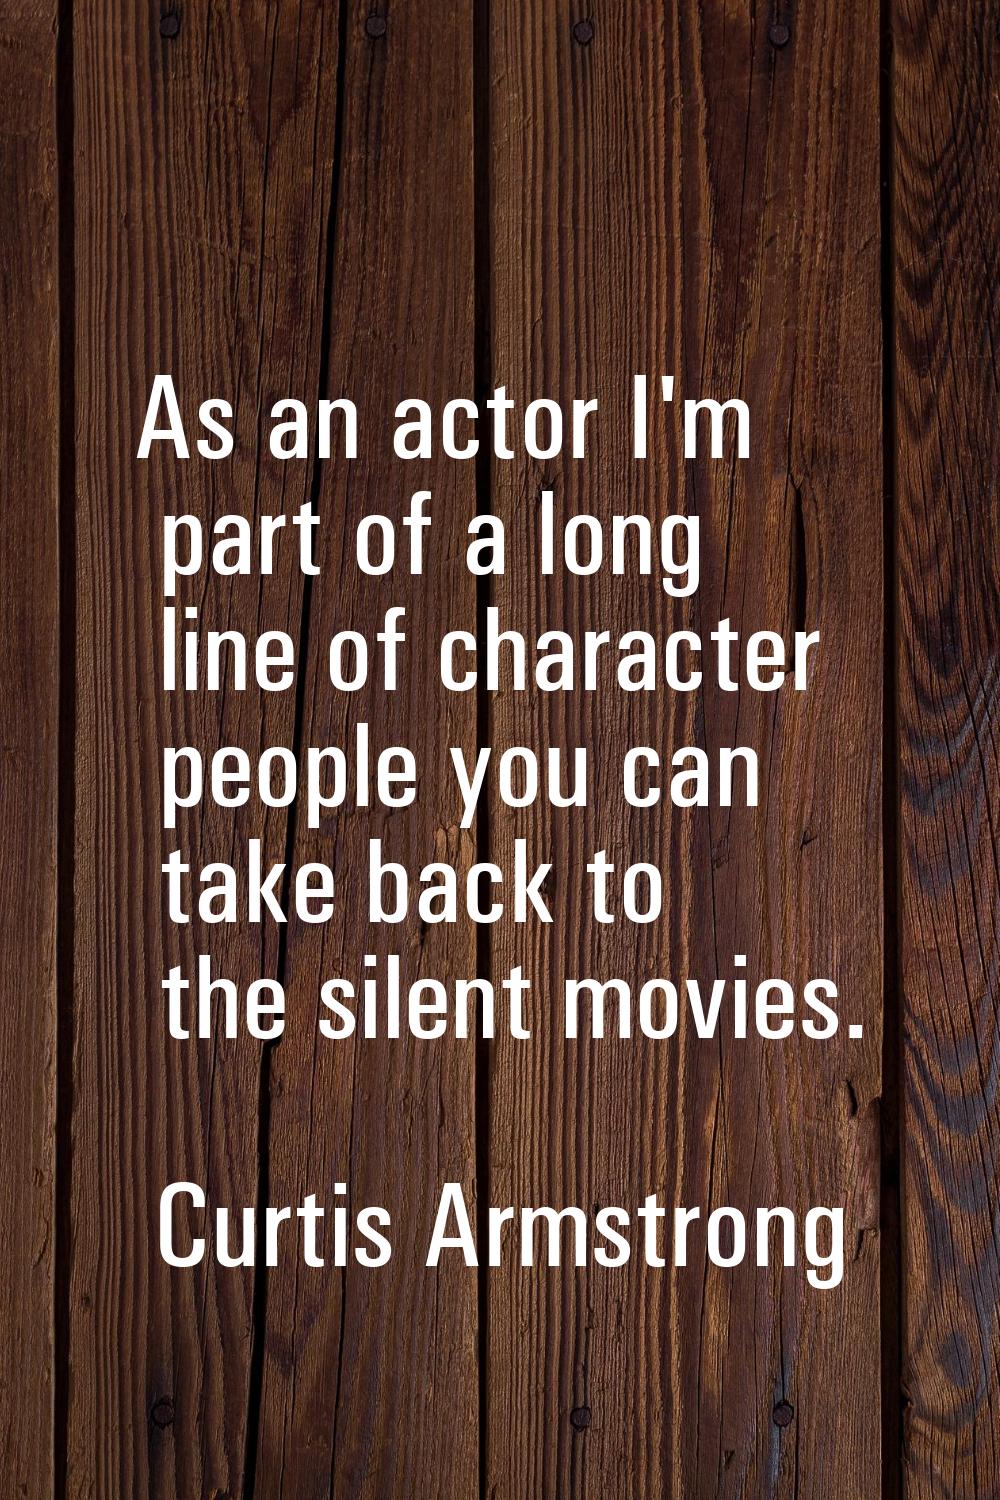 As an actor I'm part of a long line of character people you can take back to the silent movies.